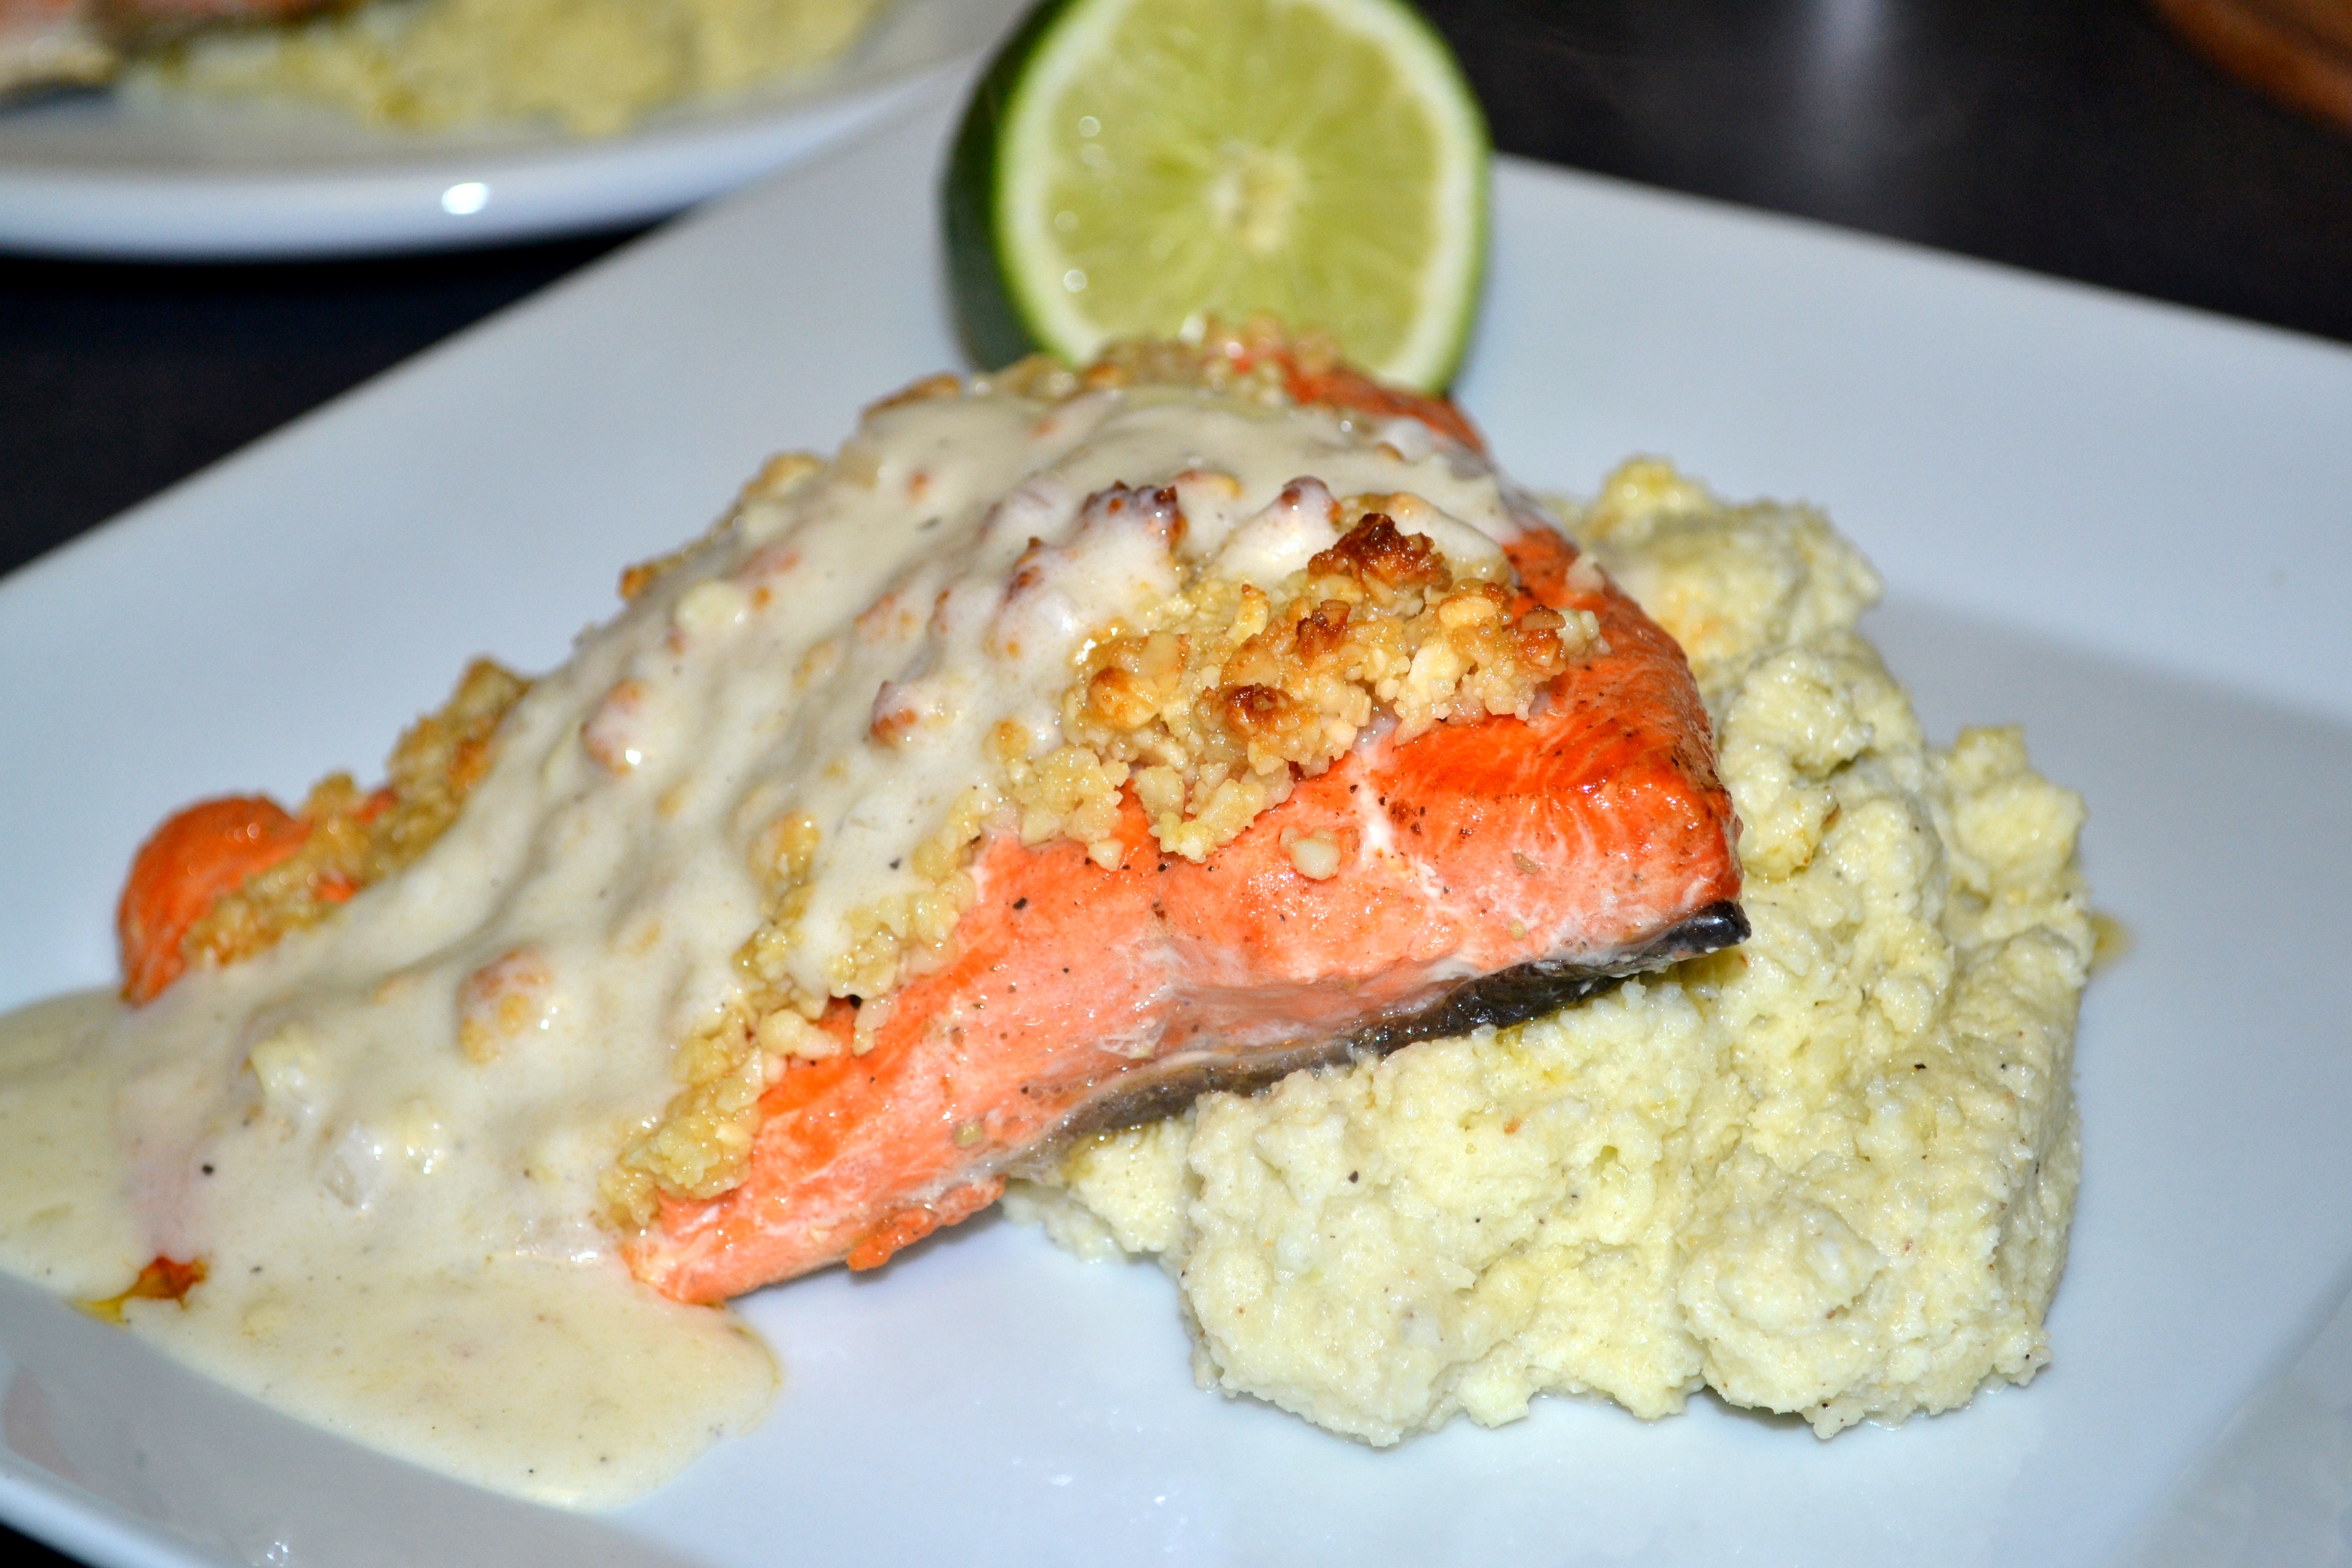 Nut Crusted Salmon with Ginger-Butter Sauce